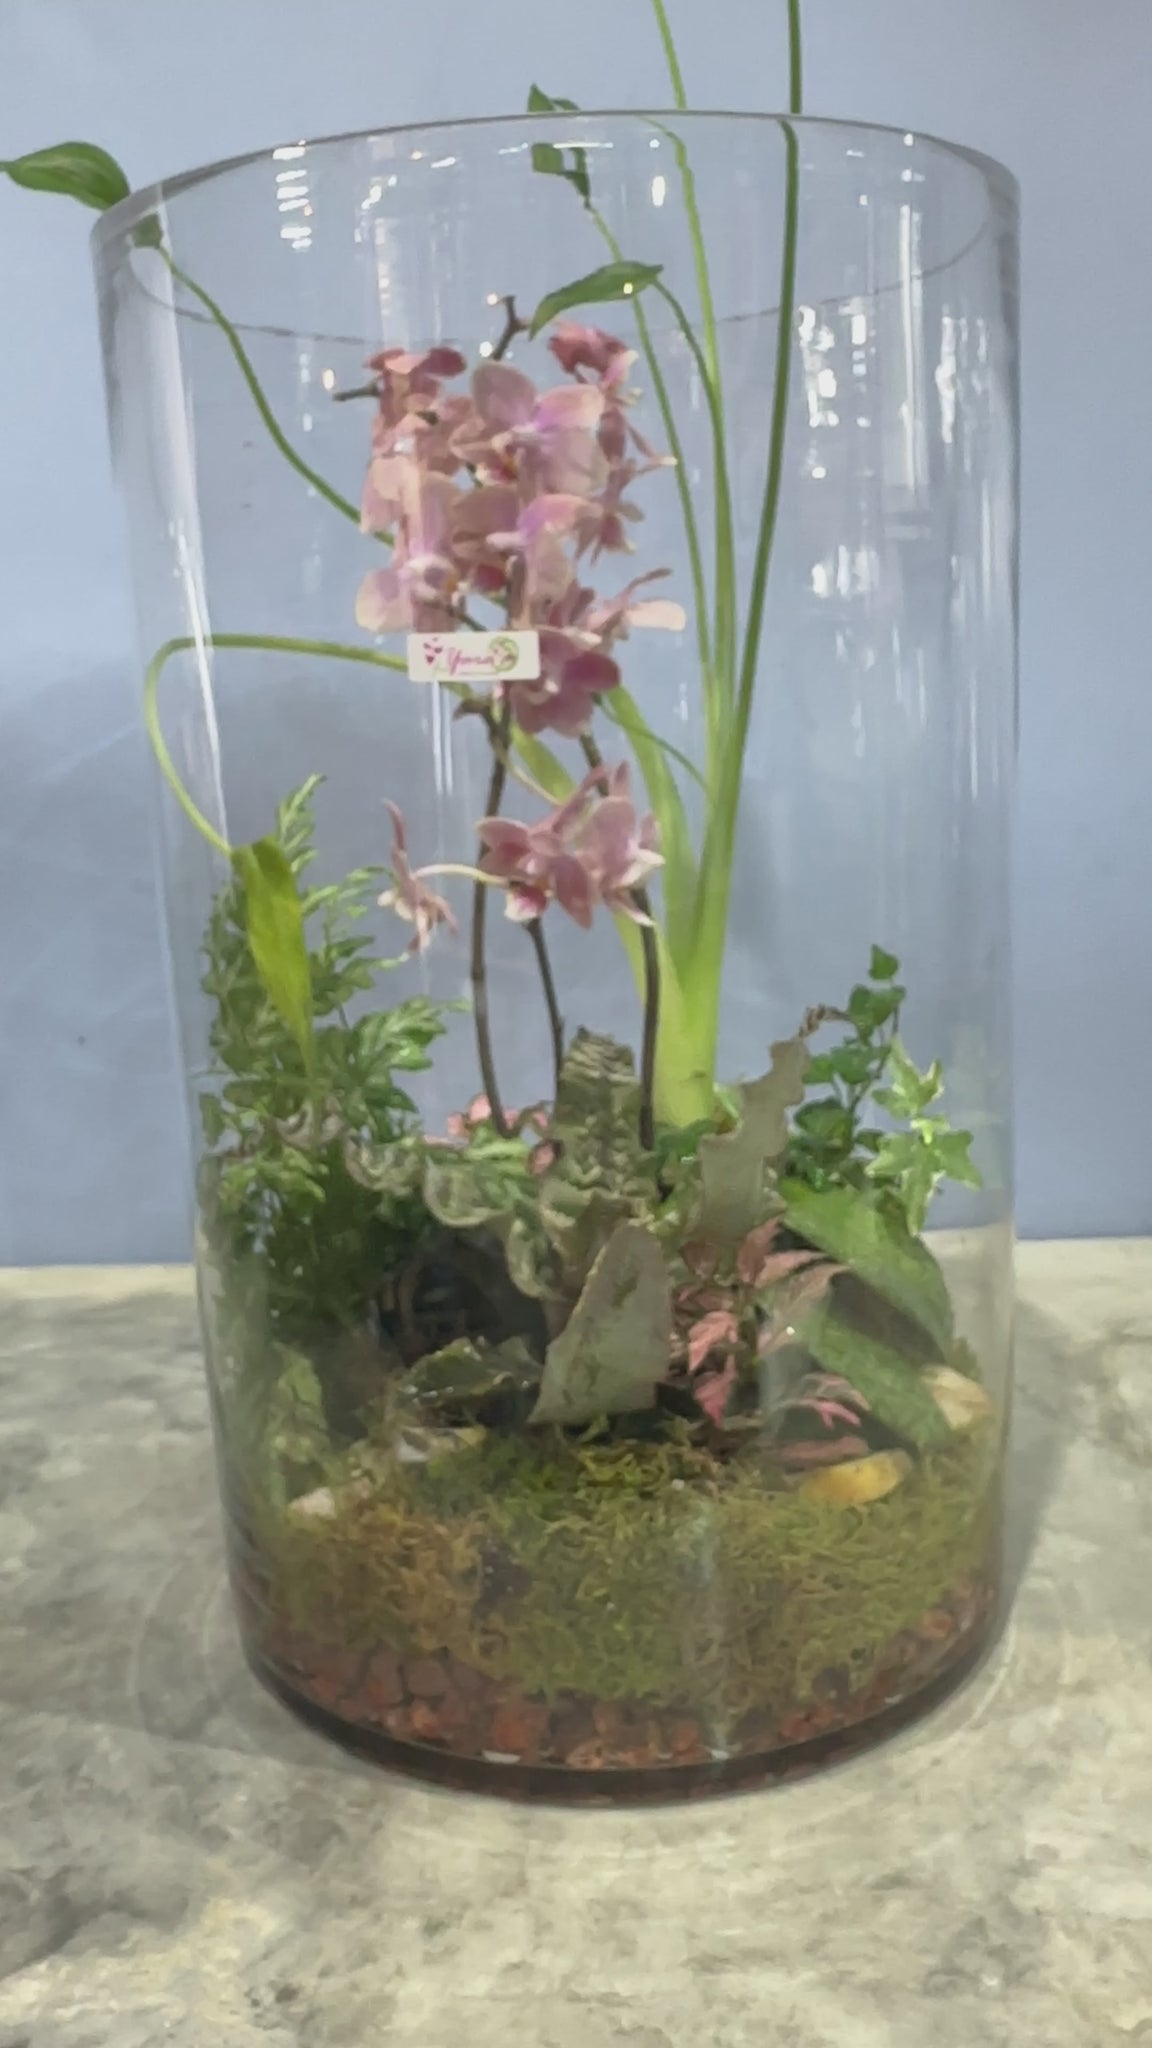 Orchid Terrariums - How Did You Make This?